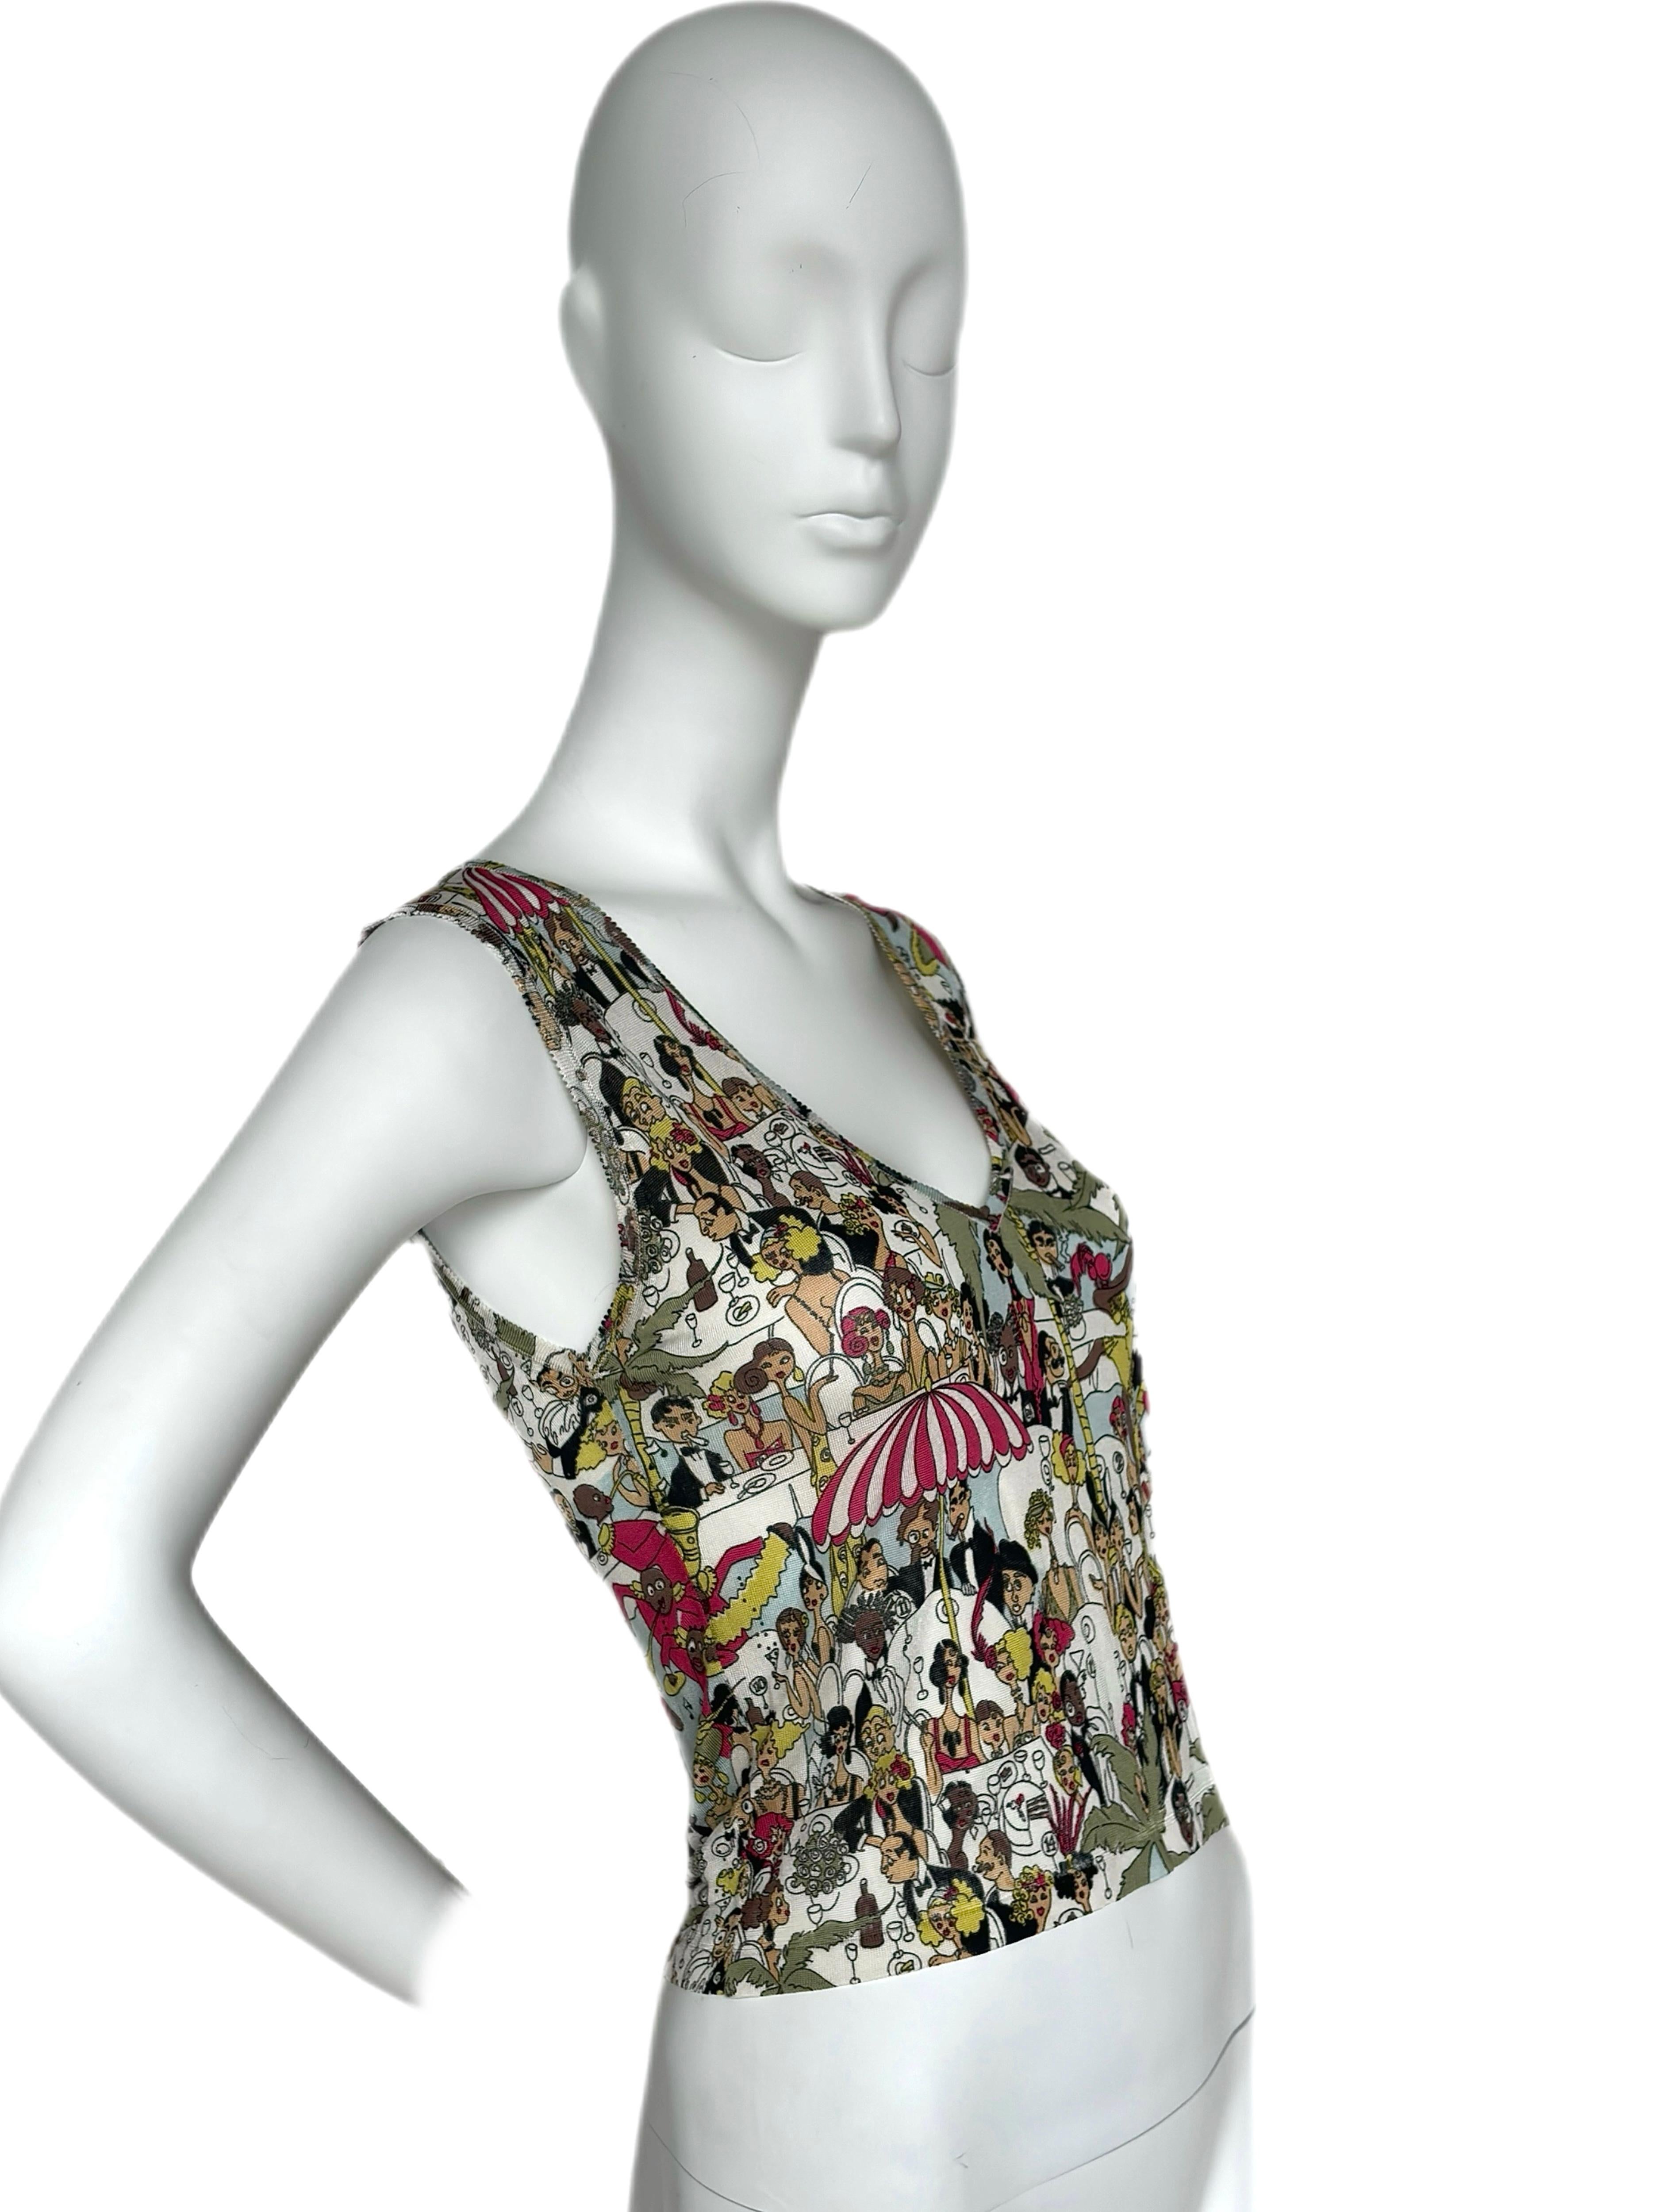 John Galliano
Vintage
SS01
Size Small
Pristine, NWT's

ALL SALES FINAL. No returns, exchanges, etc.

This fun sleeveless top is perfect for Summer. Wear to the beach, on a yacht, sipping cocktails in Capri, wherever you find yourself in this